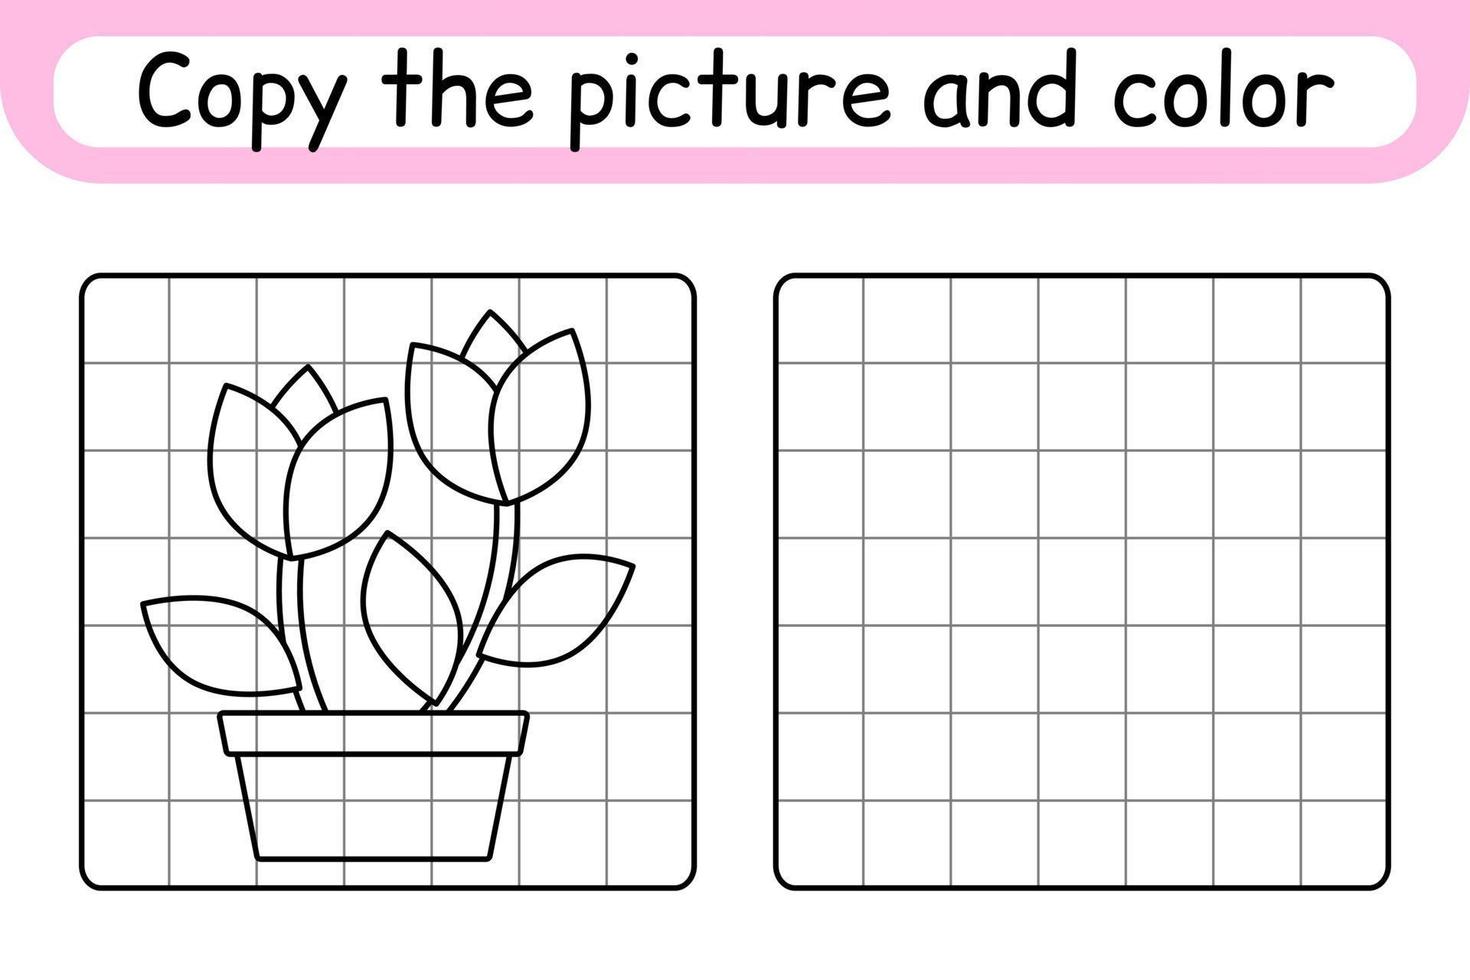 Copy the picture and color flower tulip. Complete the picture. Finish the image. Coloring book. Educational drawing exercise game for children vector